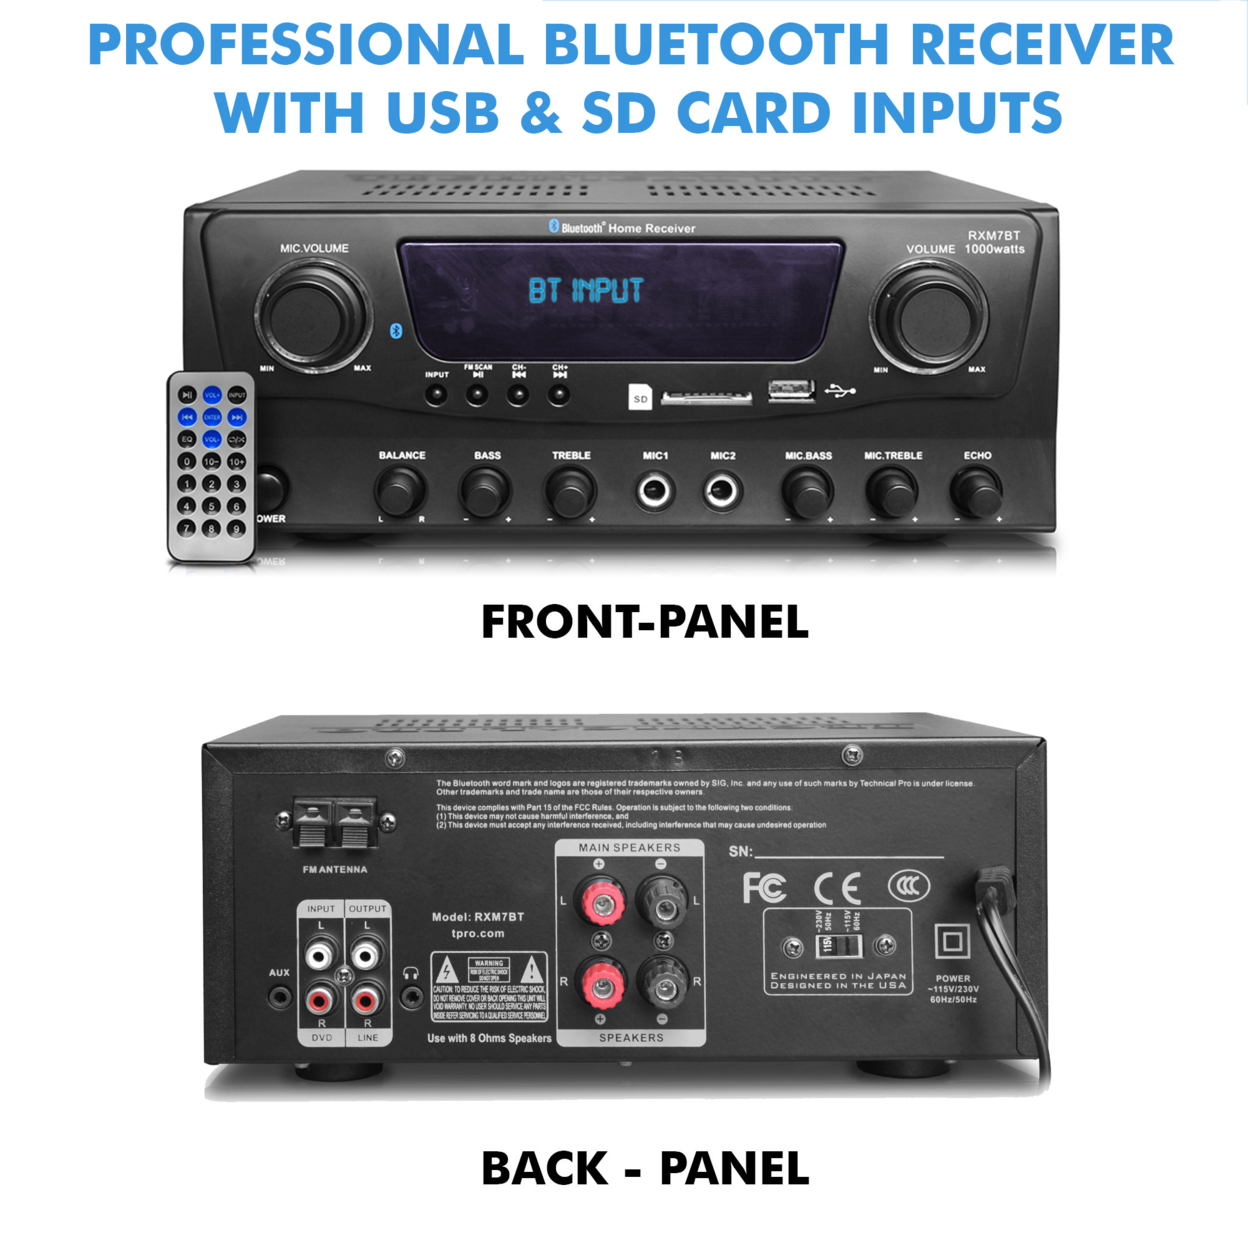 Technical Pro 1000W Bluetooth Home Amplifier & Receiver + (Qty 6) 5.25 In-Ceiling Stereo Speakers + Handheld Microphone W/ 10 Ft Cable